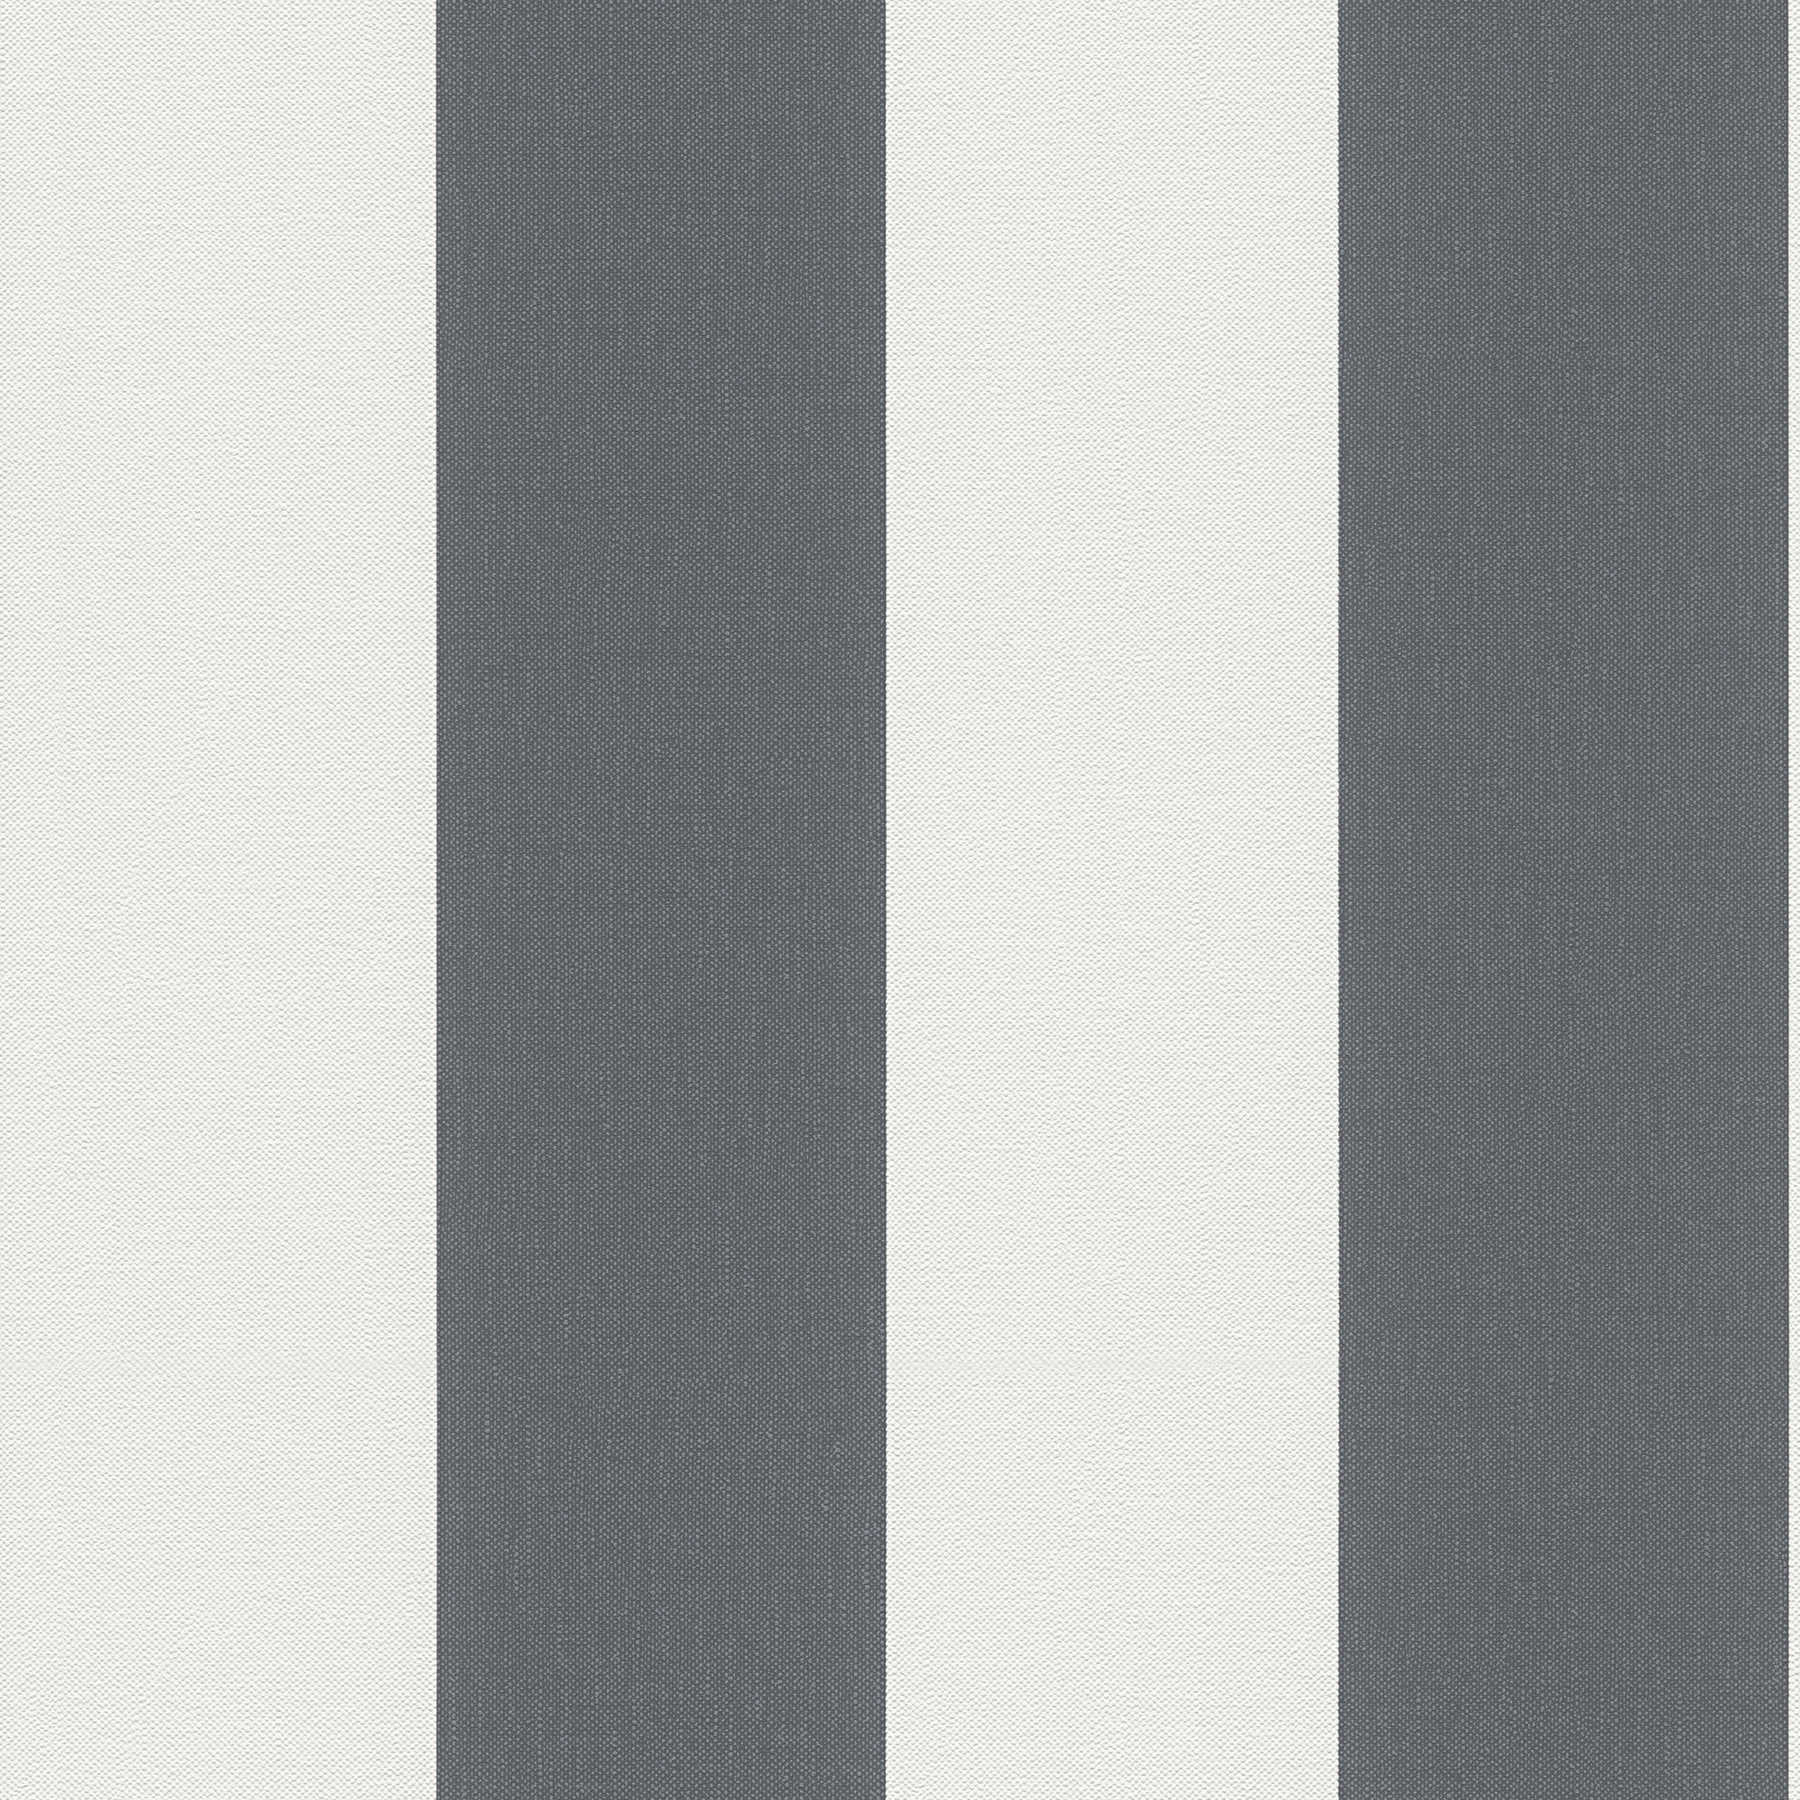         Block stripe wallpaper with linen structure - grey, white
    